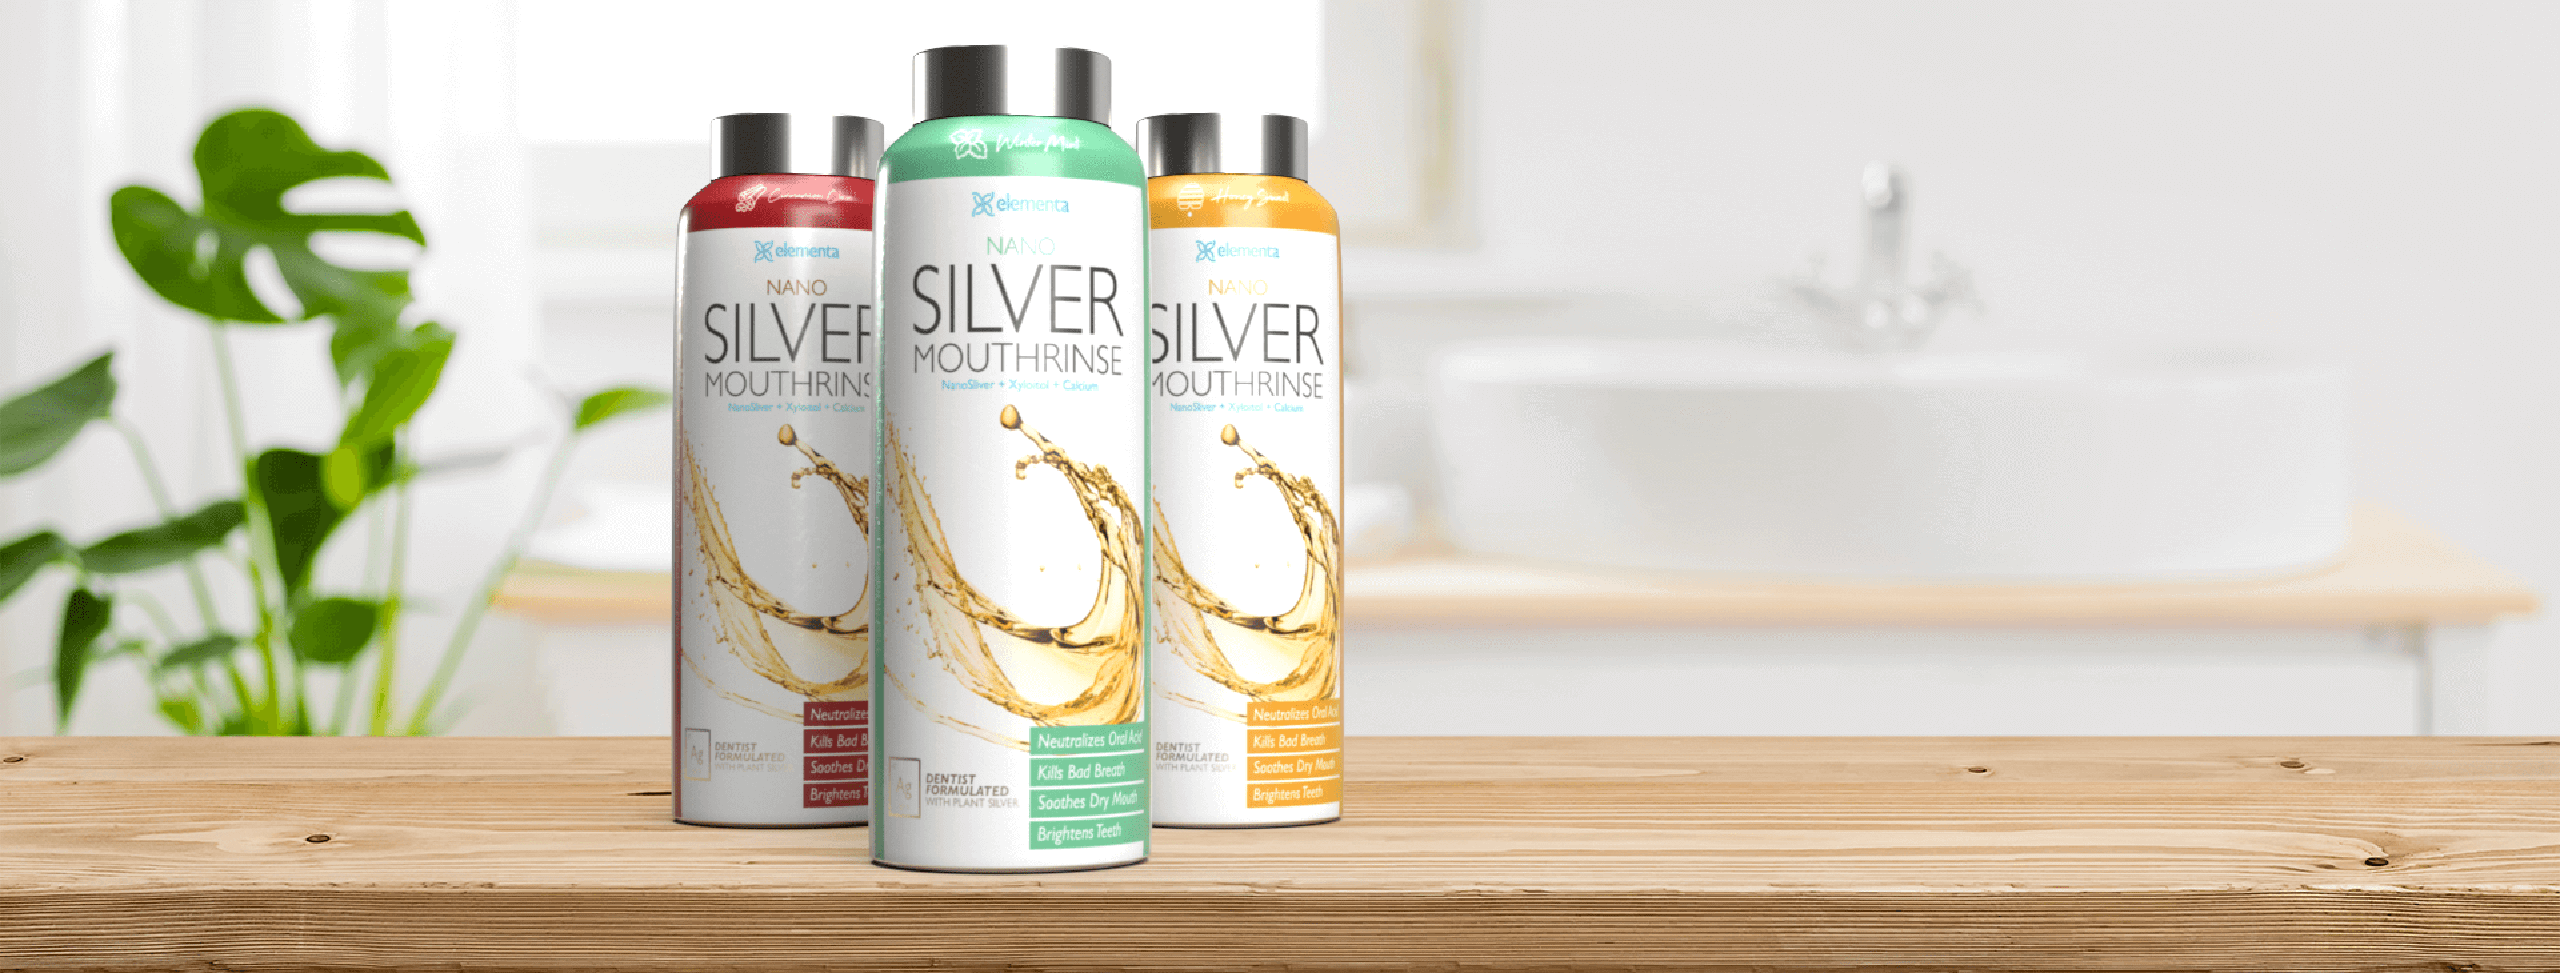 Elementa Silver - Nano Silver Products for Dental Professionals